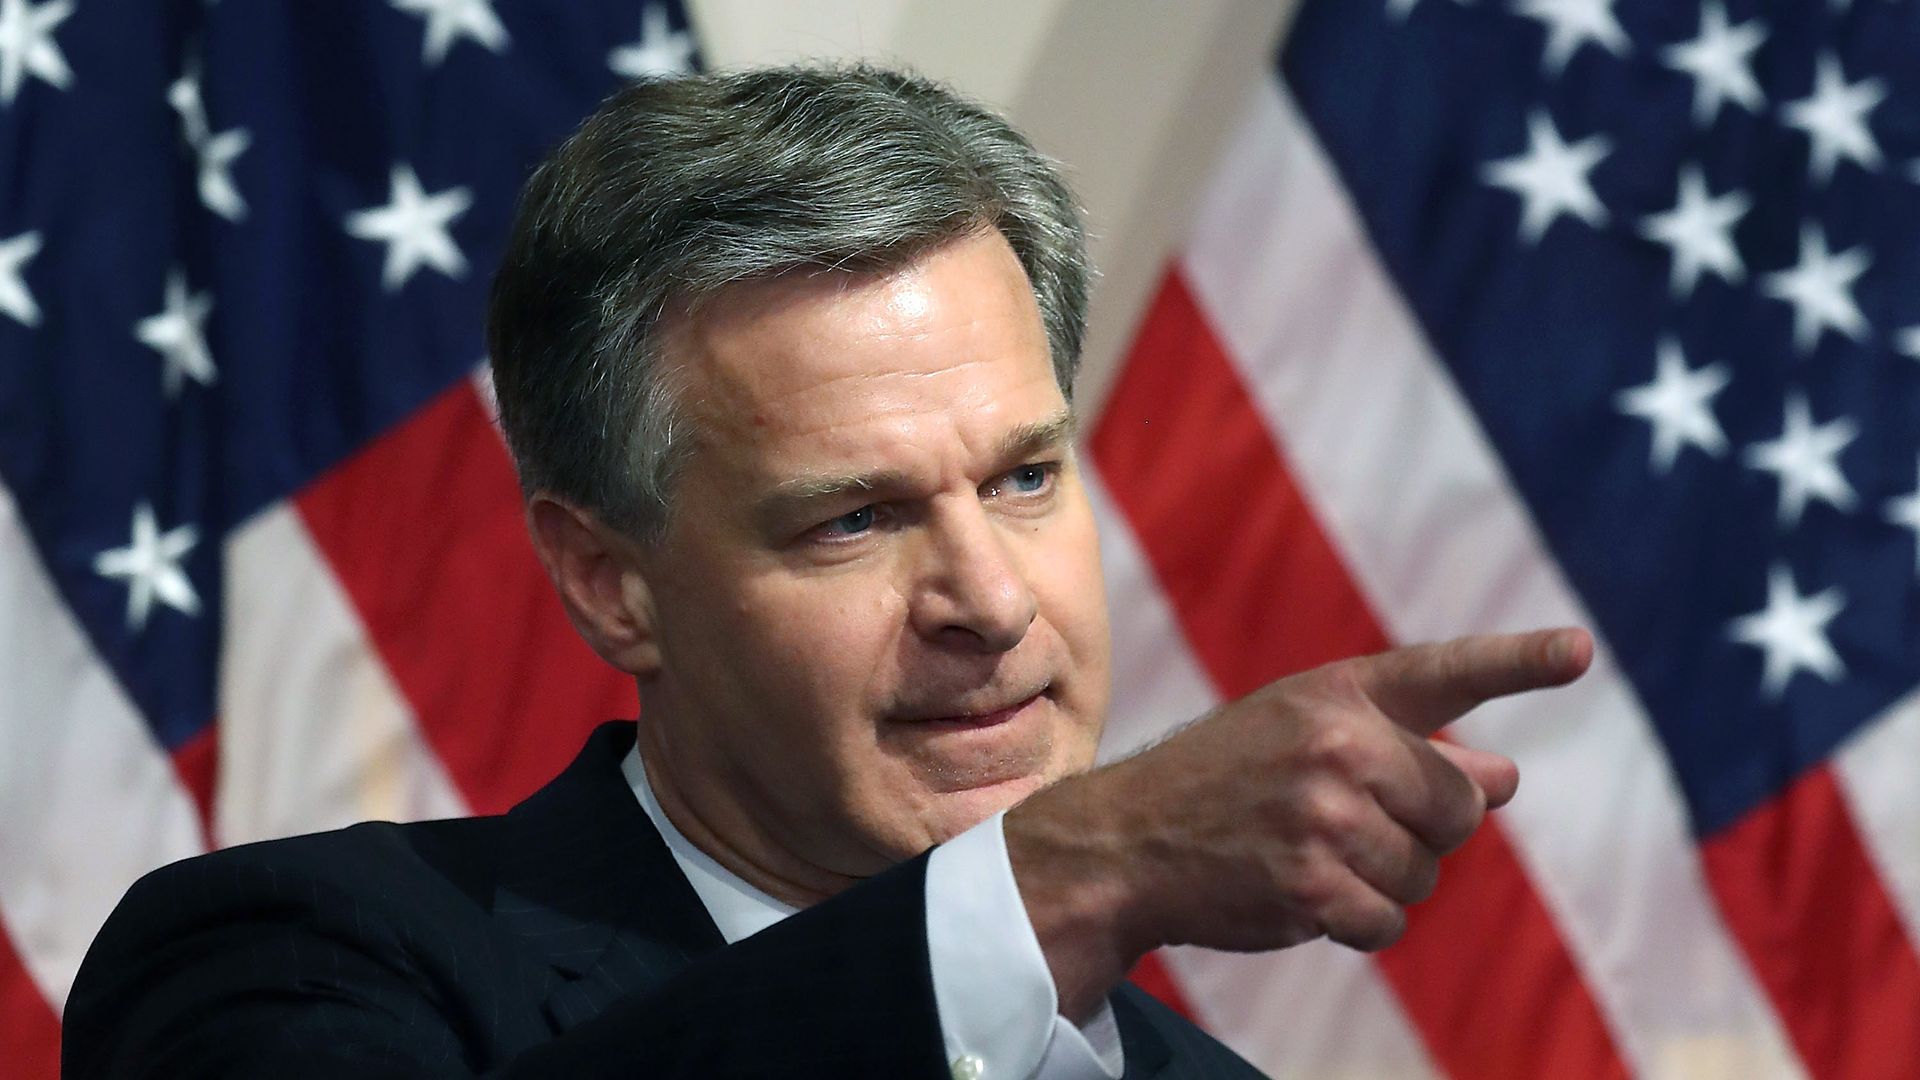 FBI Director is Christopher A. Wray speaks to the media during a news conference at FBI Headquarters, on June 14, 2018 in Washington, DC. 